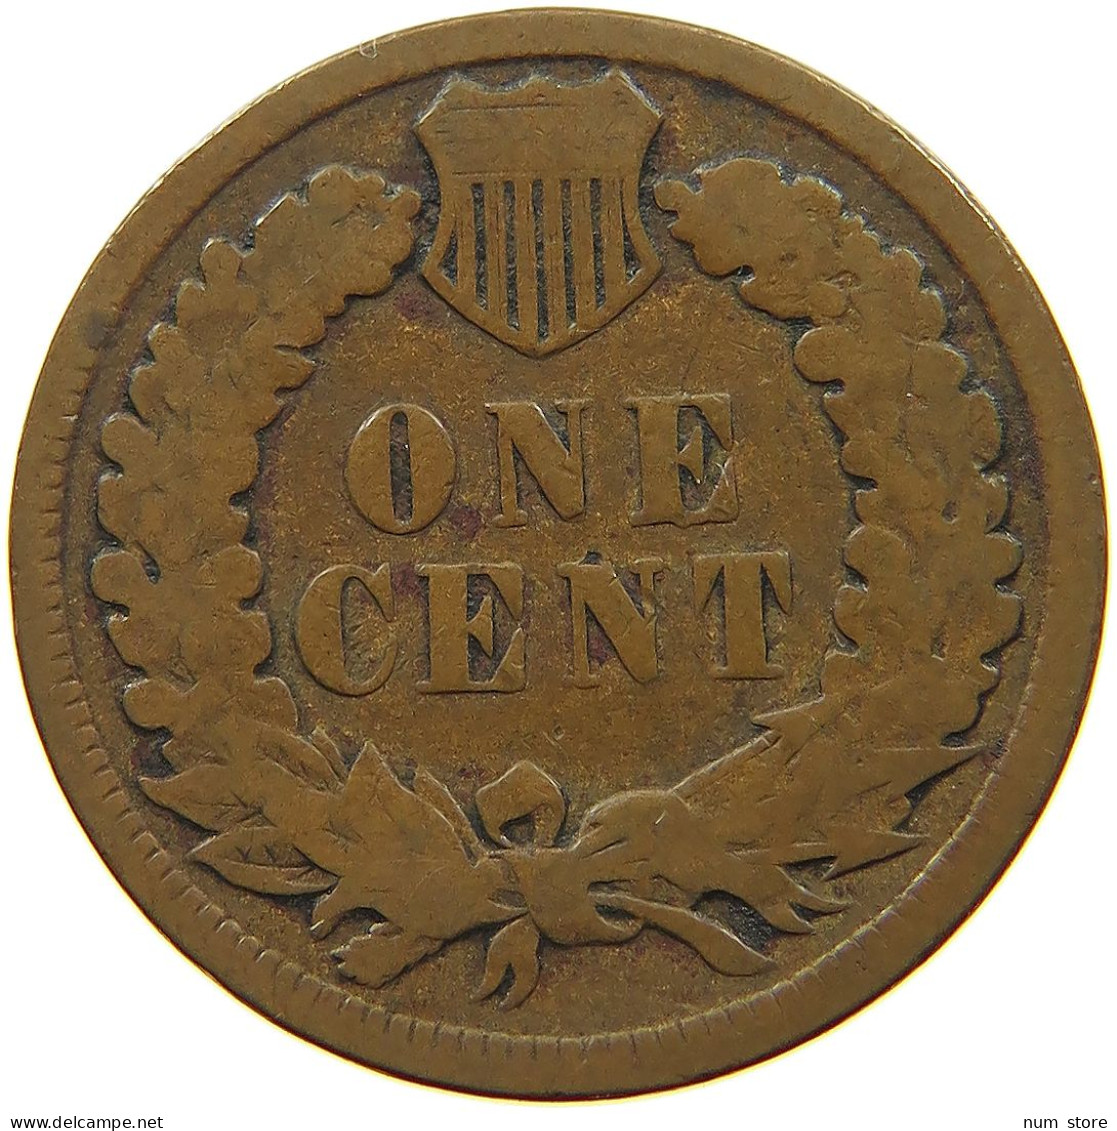 UNITED STATES OF AMERICA CENT 1891 INDIAN HEAD #s063 0173 - 1859-1909: Indian Head